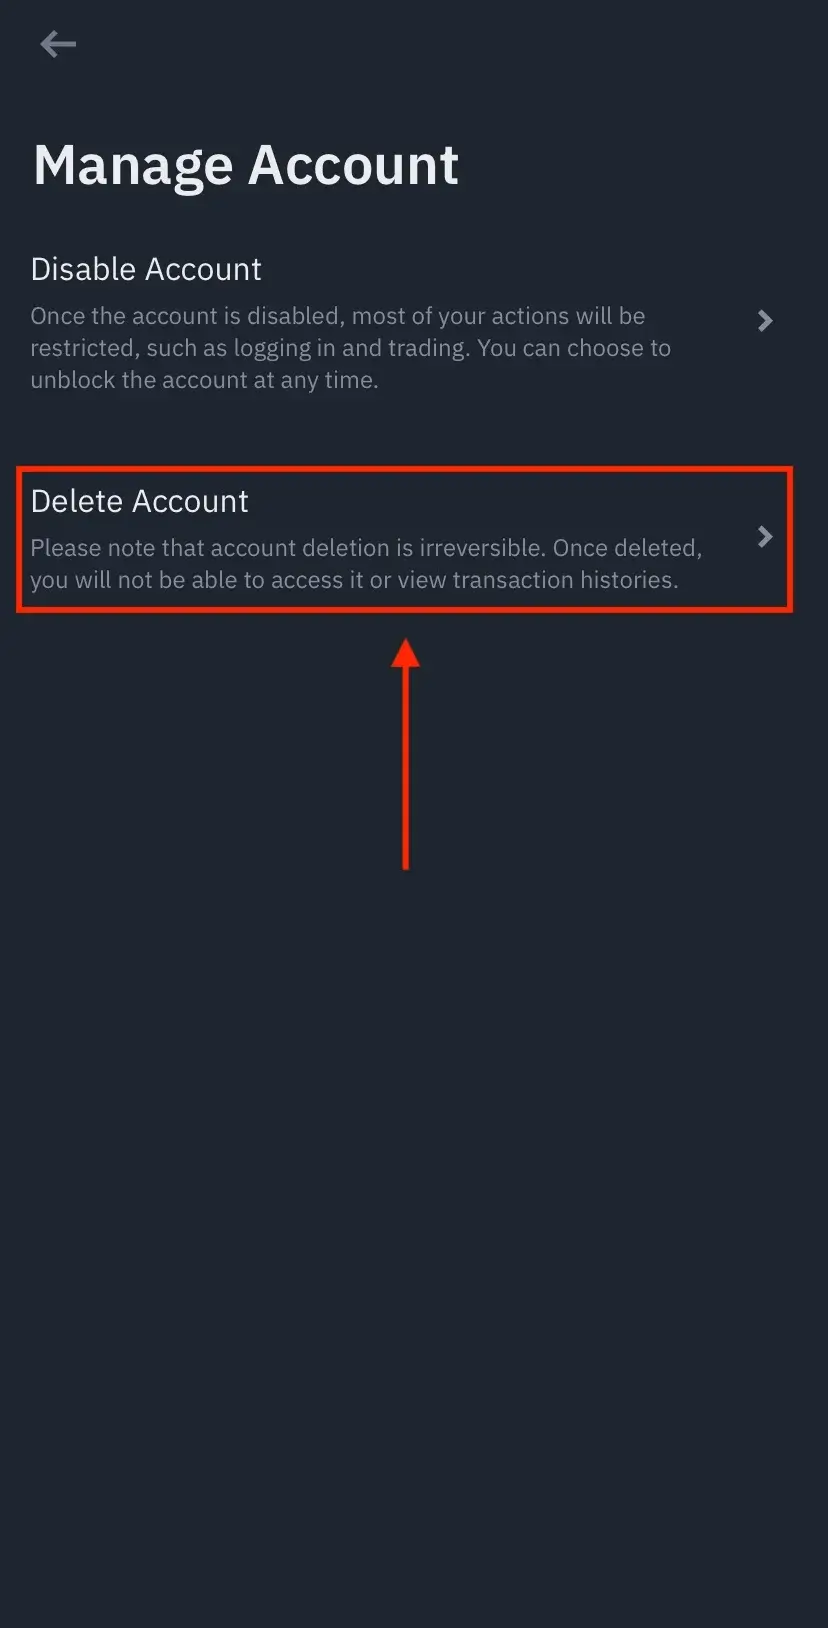 Step 6: Tap on “Delete Account”